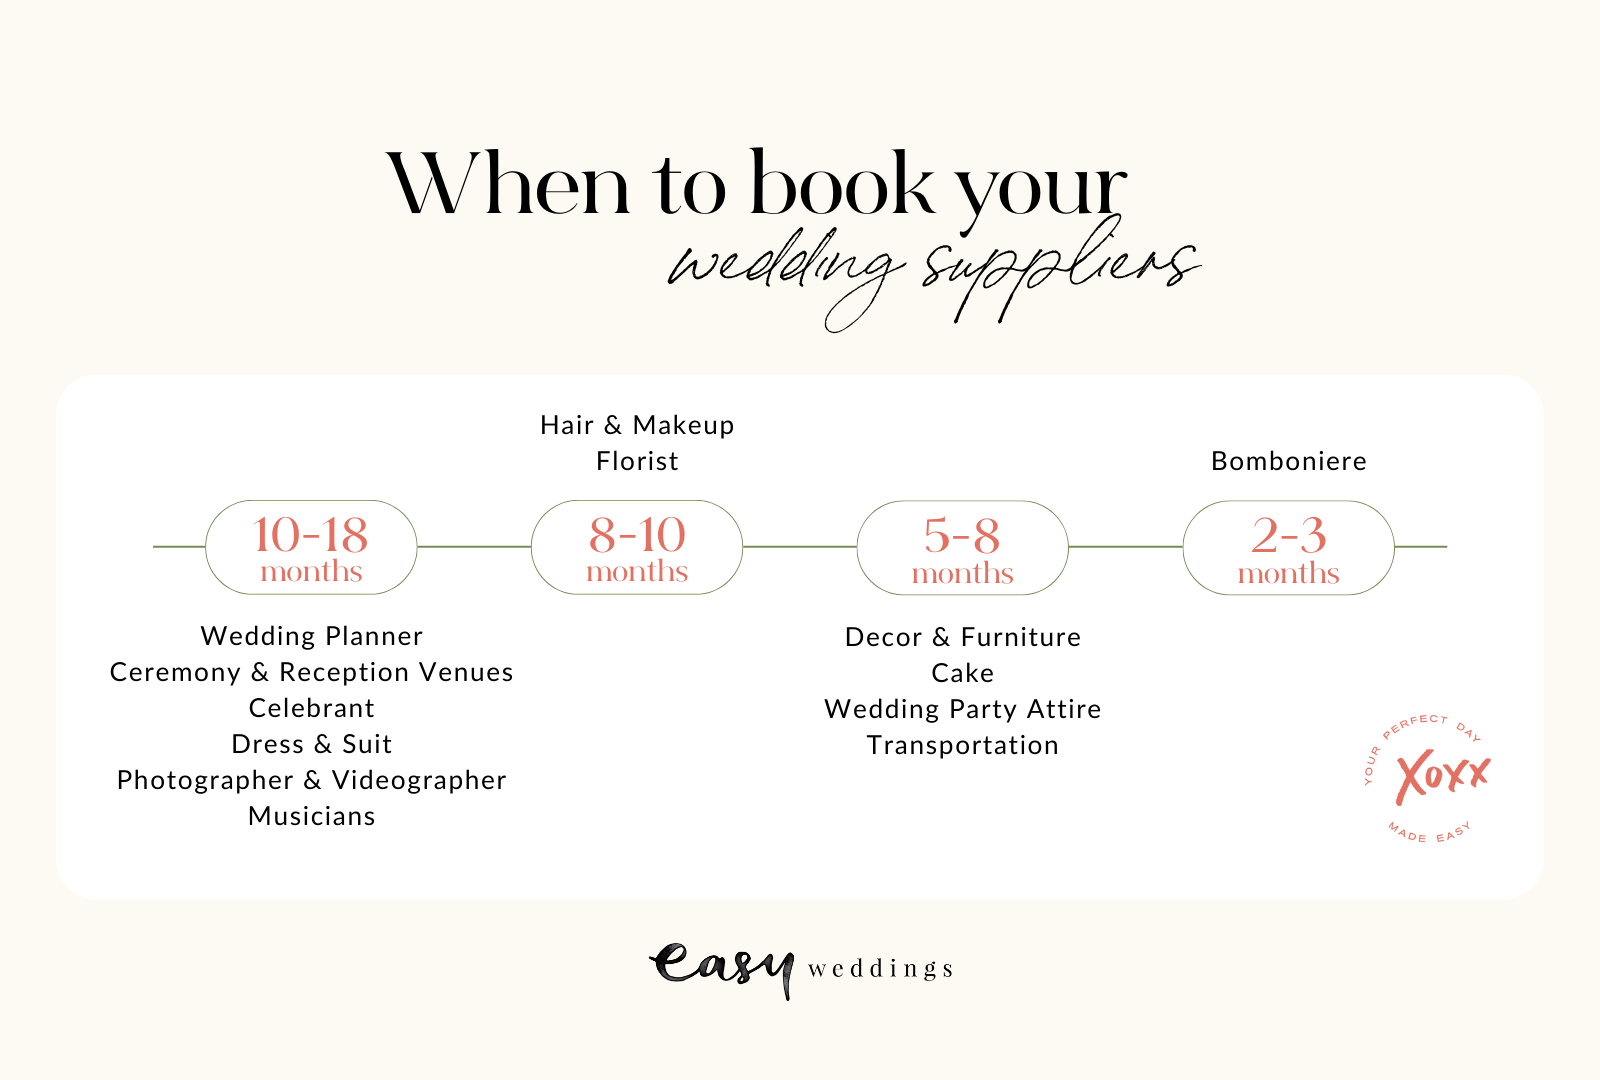 When to book your wedding suppliers